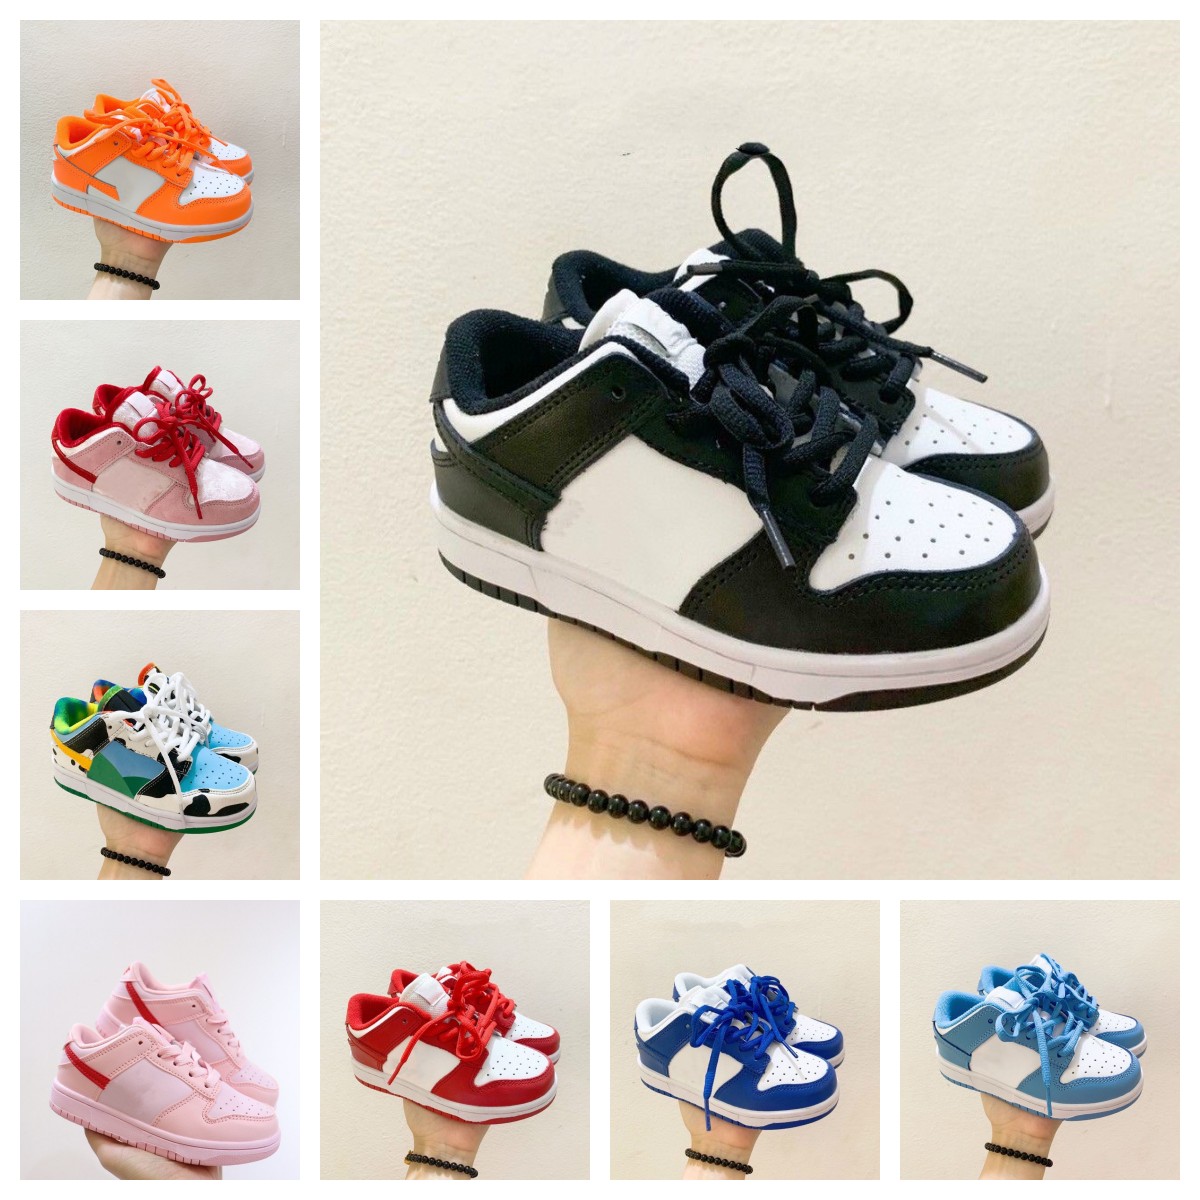 

Athletic Outdoor Kid Dunks low Sb Panda White Black shoes Children Preschool PS GAI Boys Girls Casual Fashion Sneakers Children Walking toddler Sports Trainers, Add postage